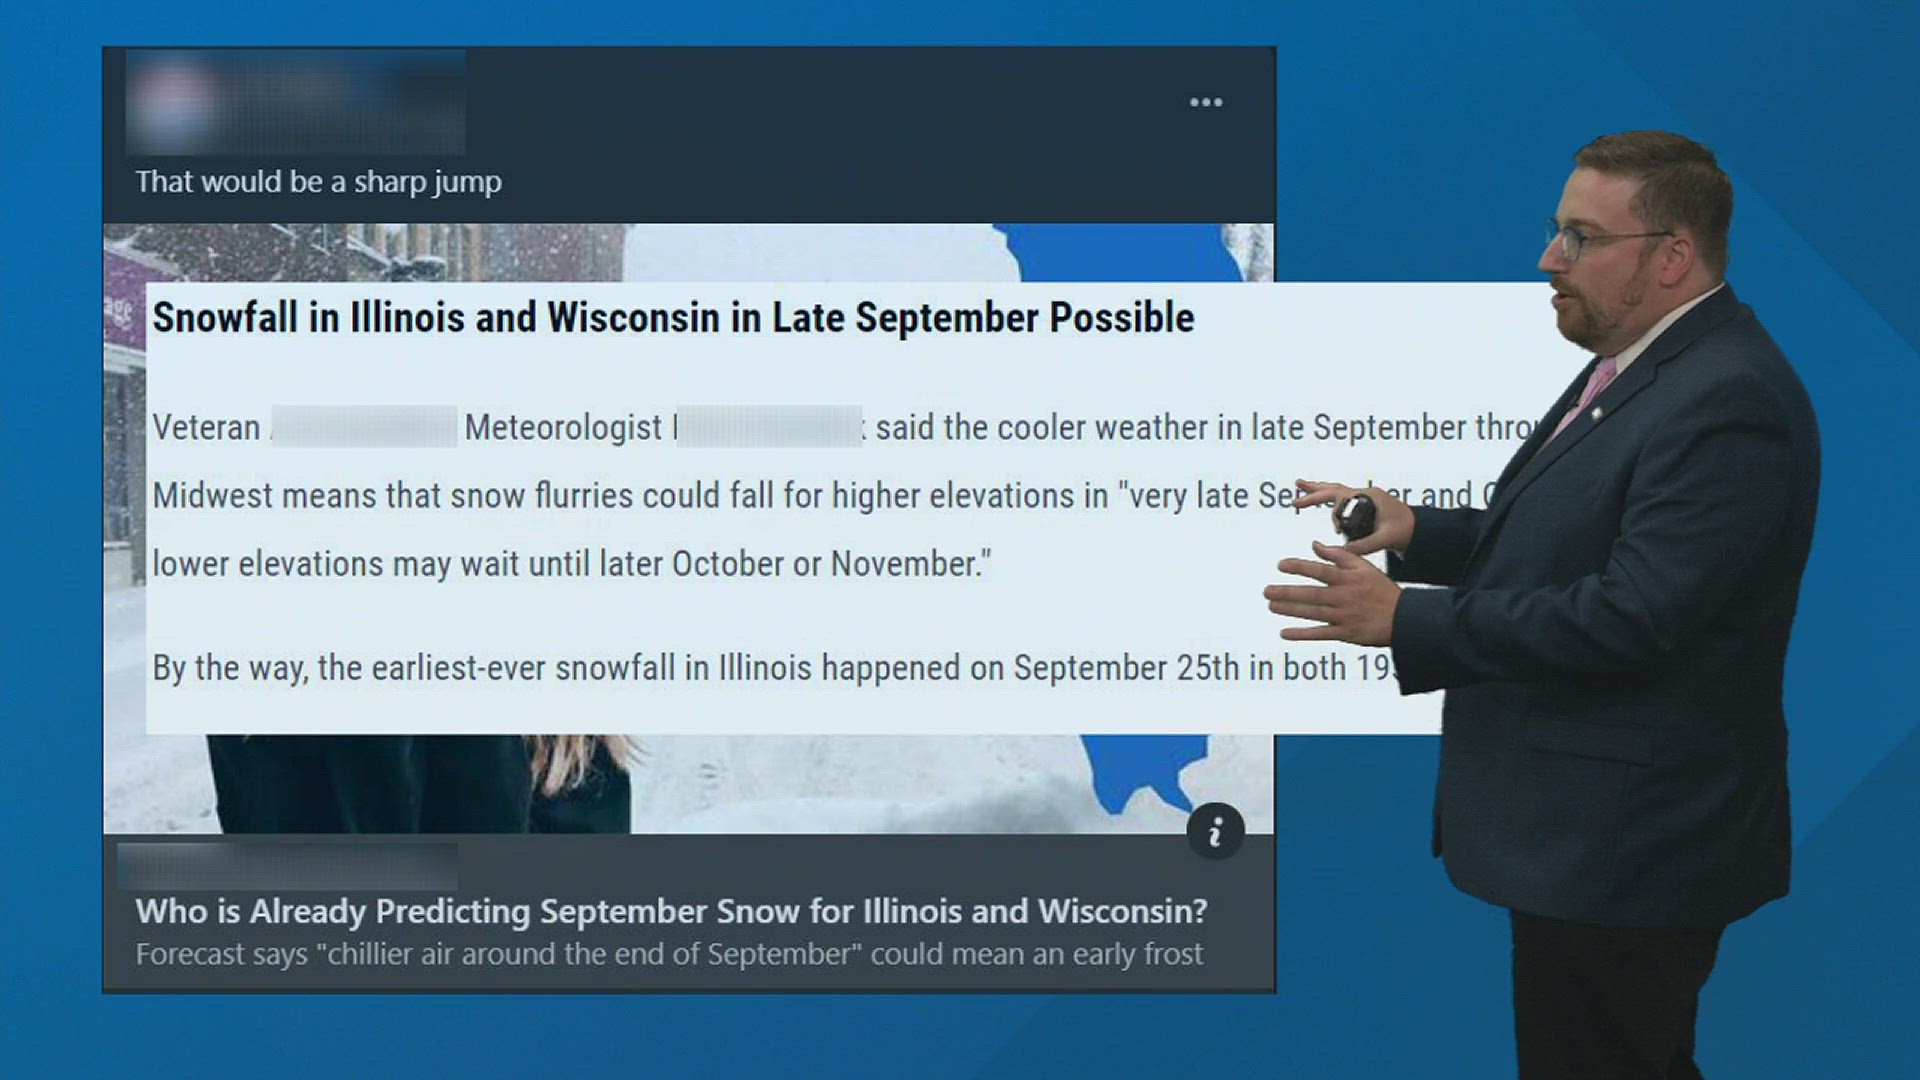 A recent post on social media claims meteorologists are predicting a chilly September with snow flurries in Wisconsin and Illinois by the end of the month.